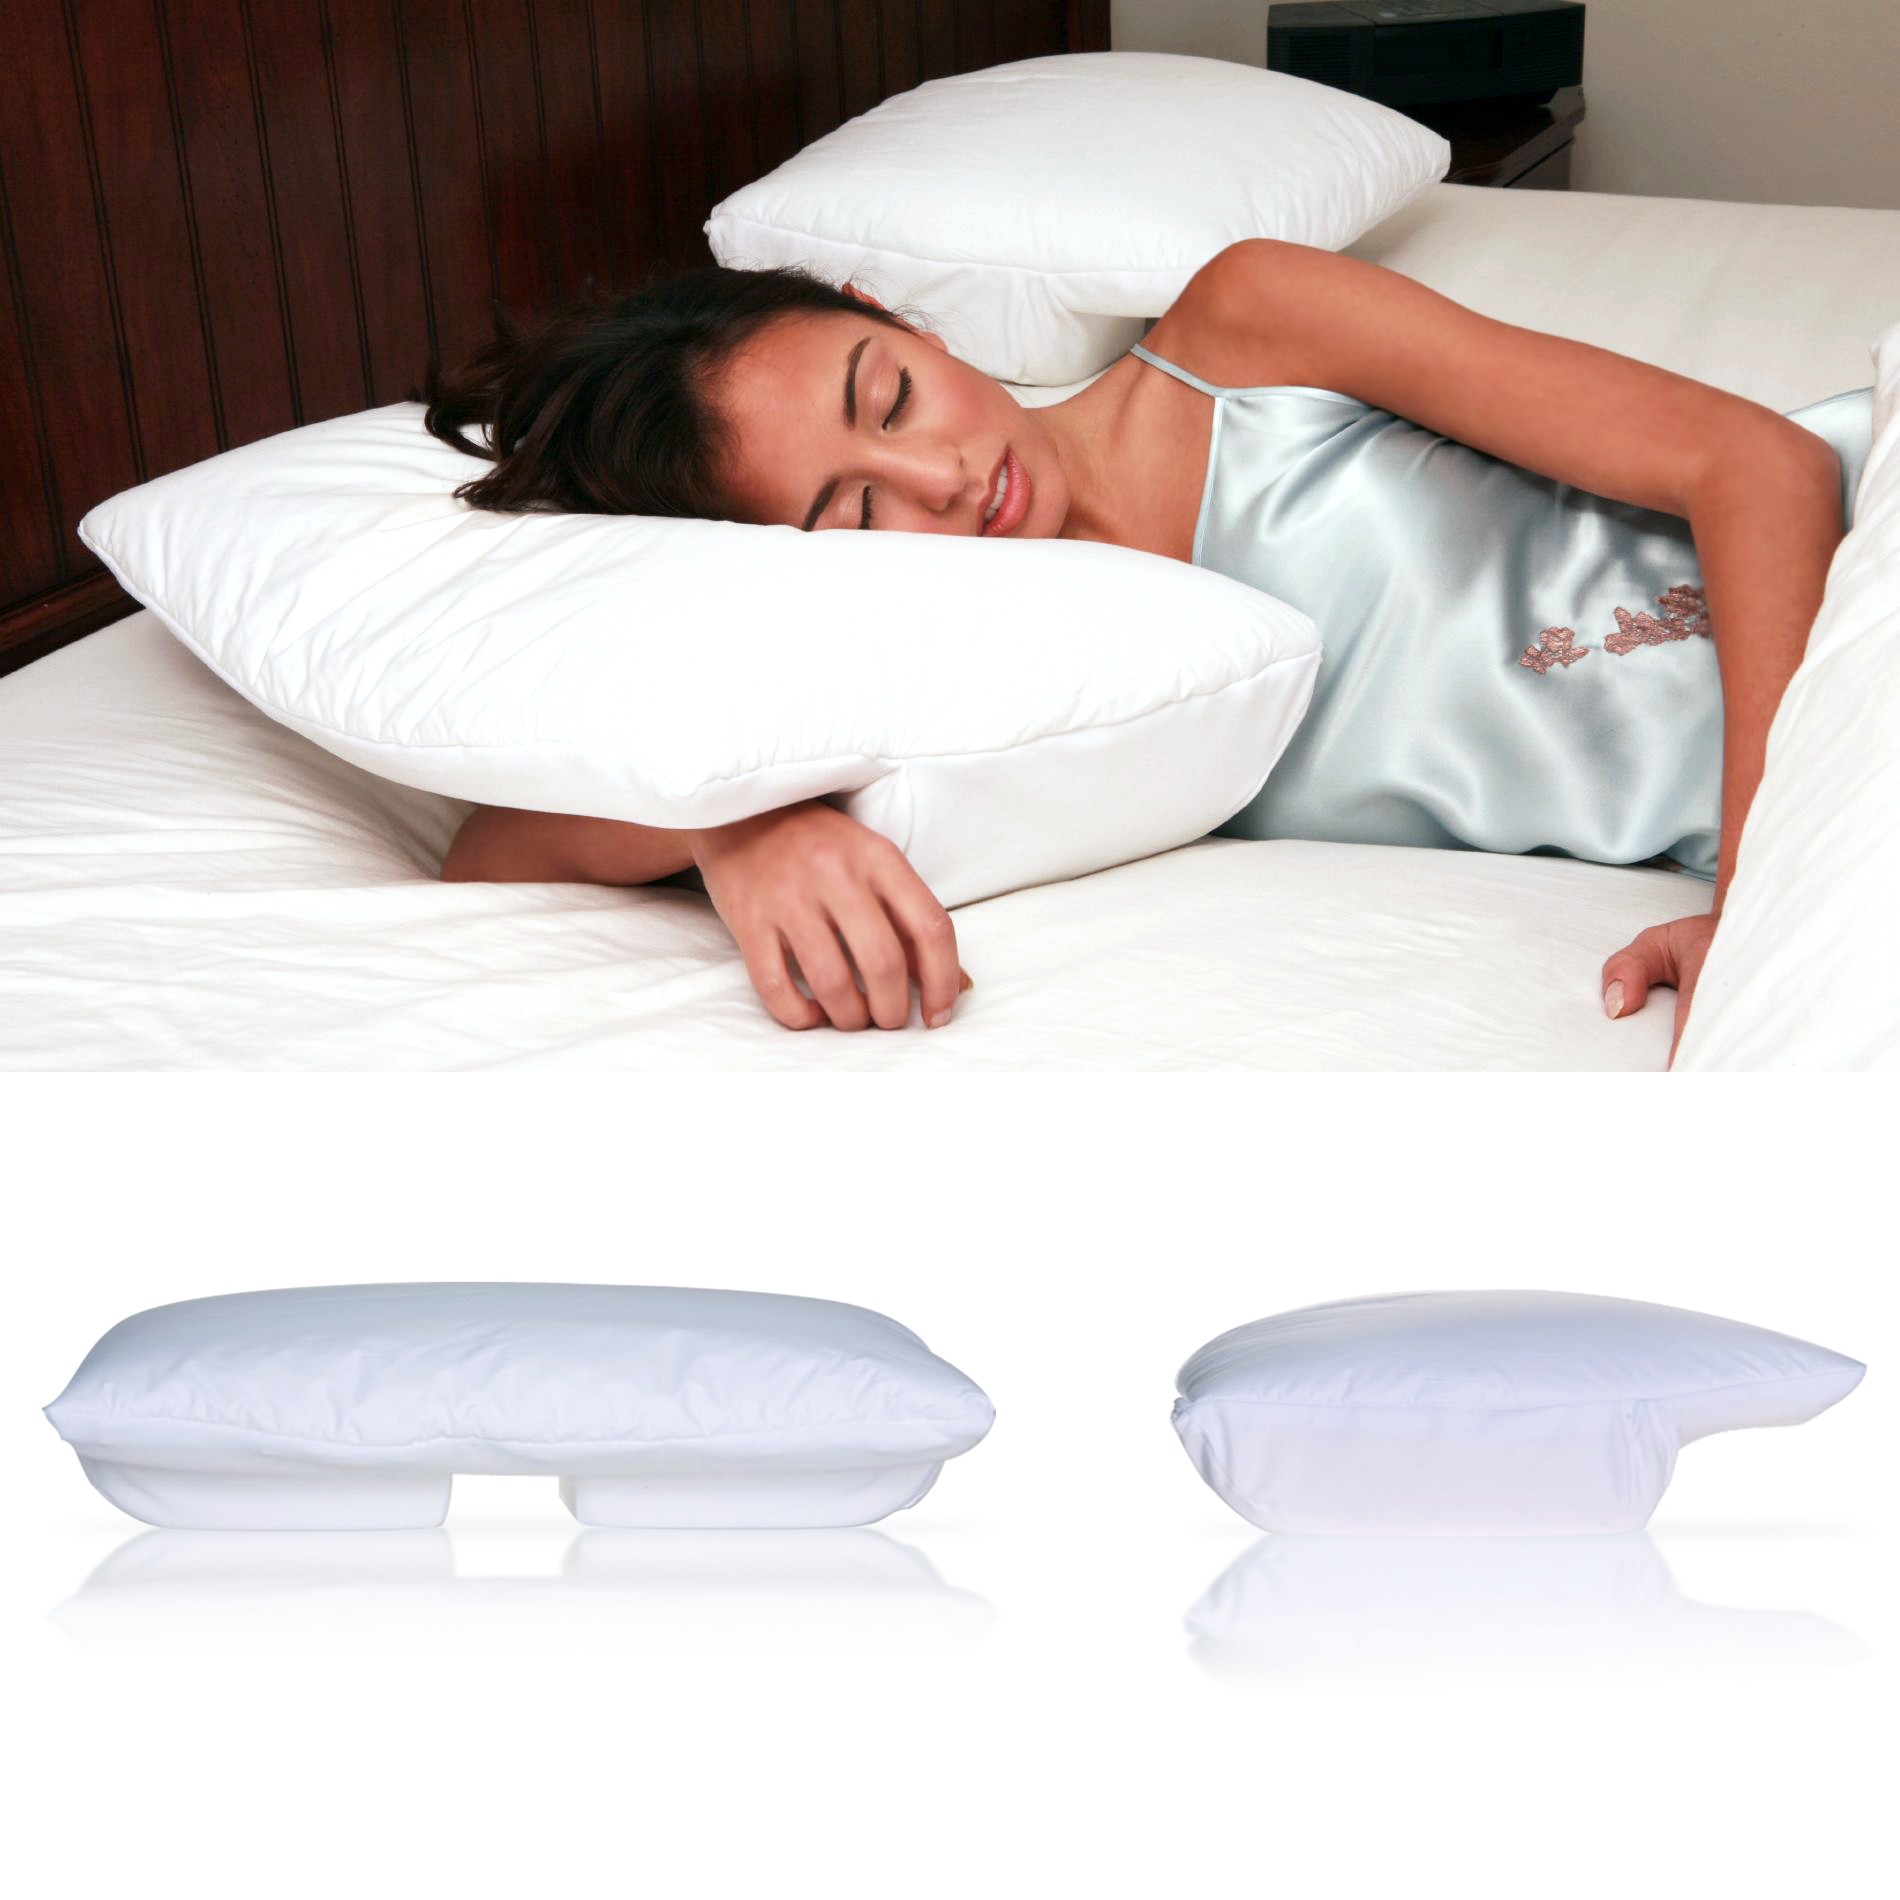 side sleeper with arm under pillow